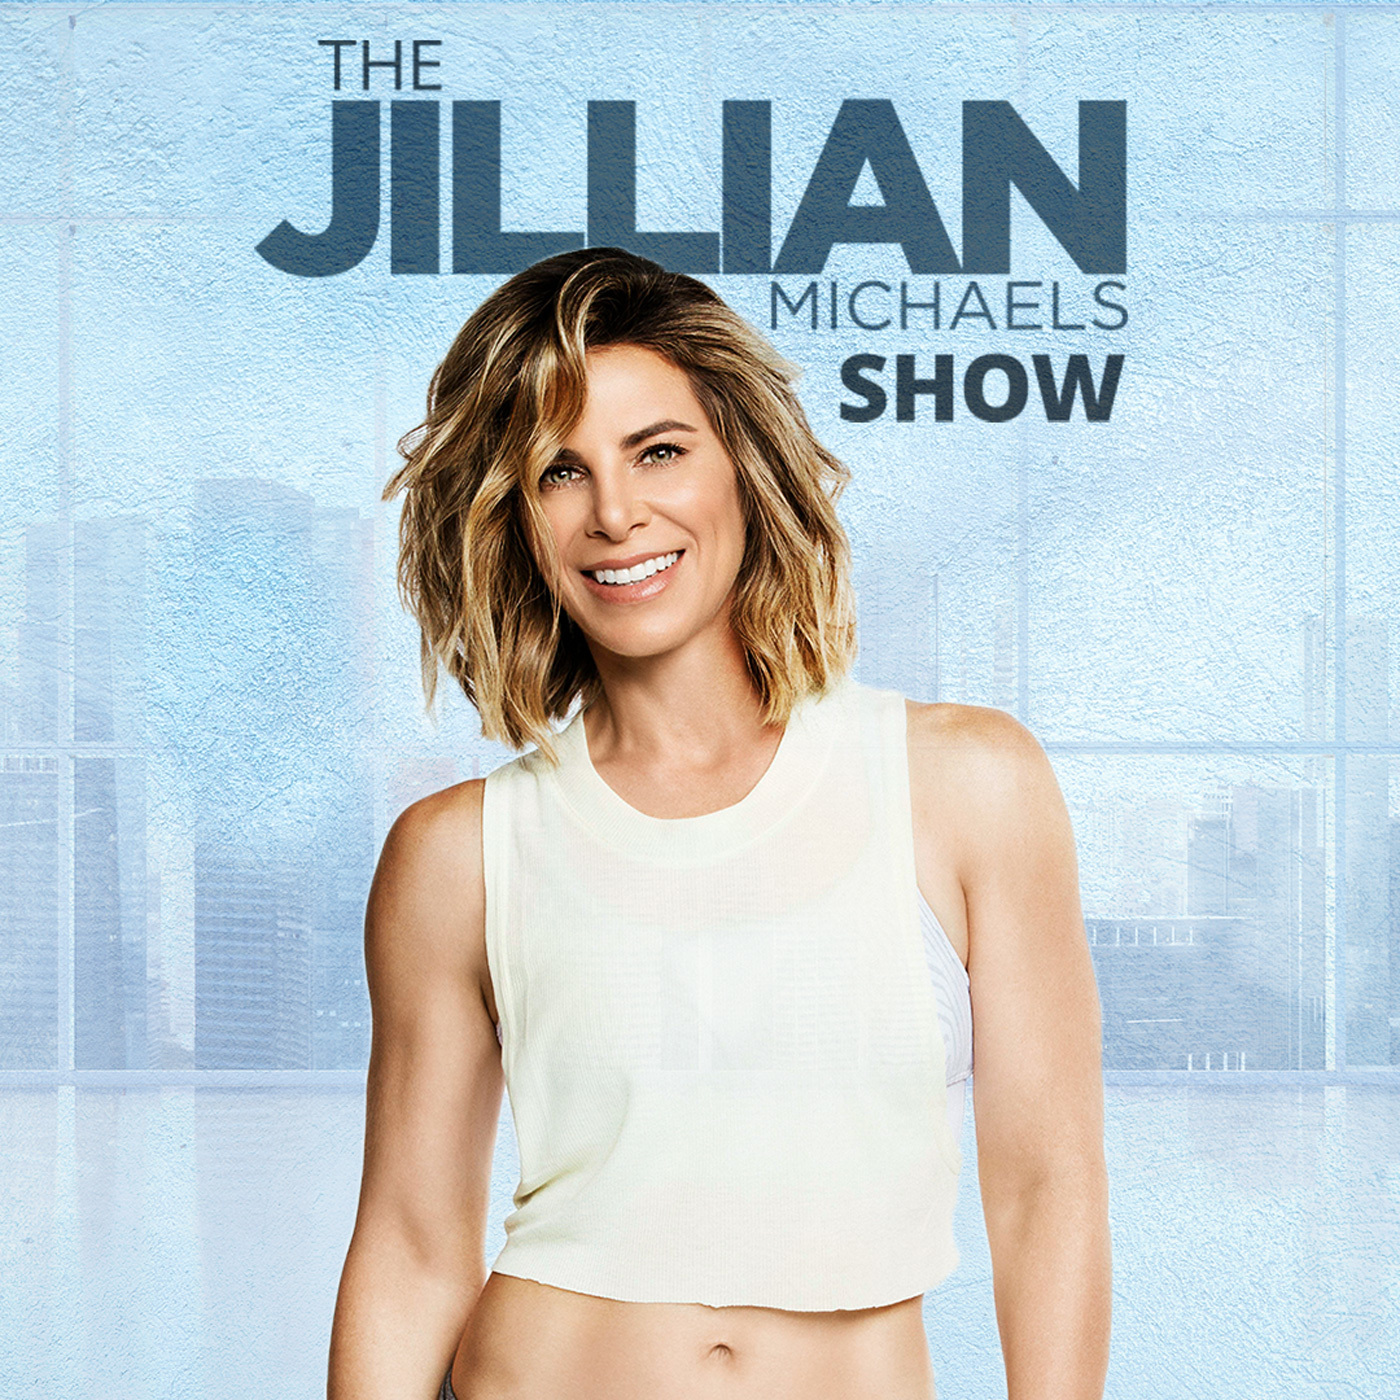 The Jillian Michaels Show by Wondery on Apple Podcasts